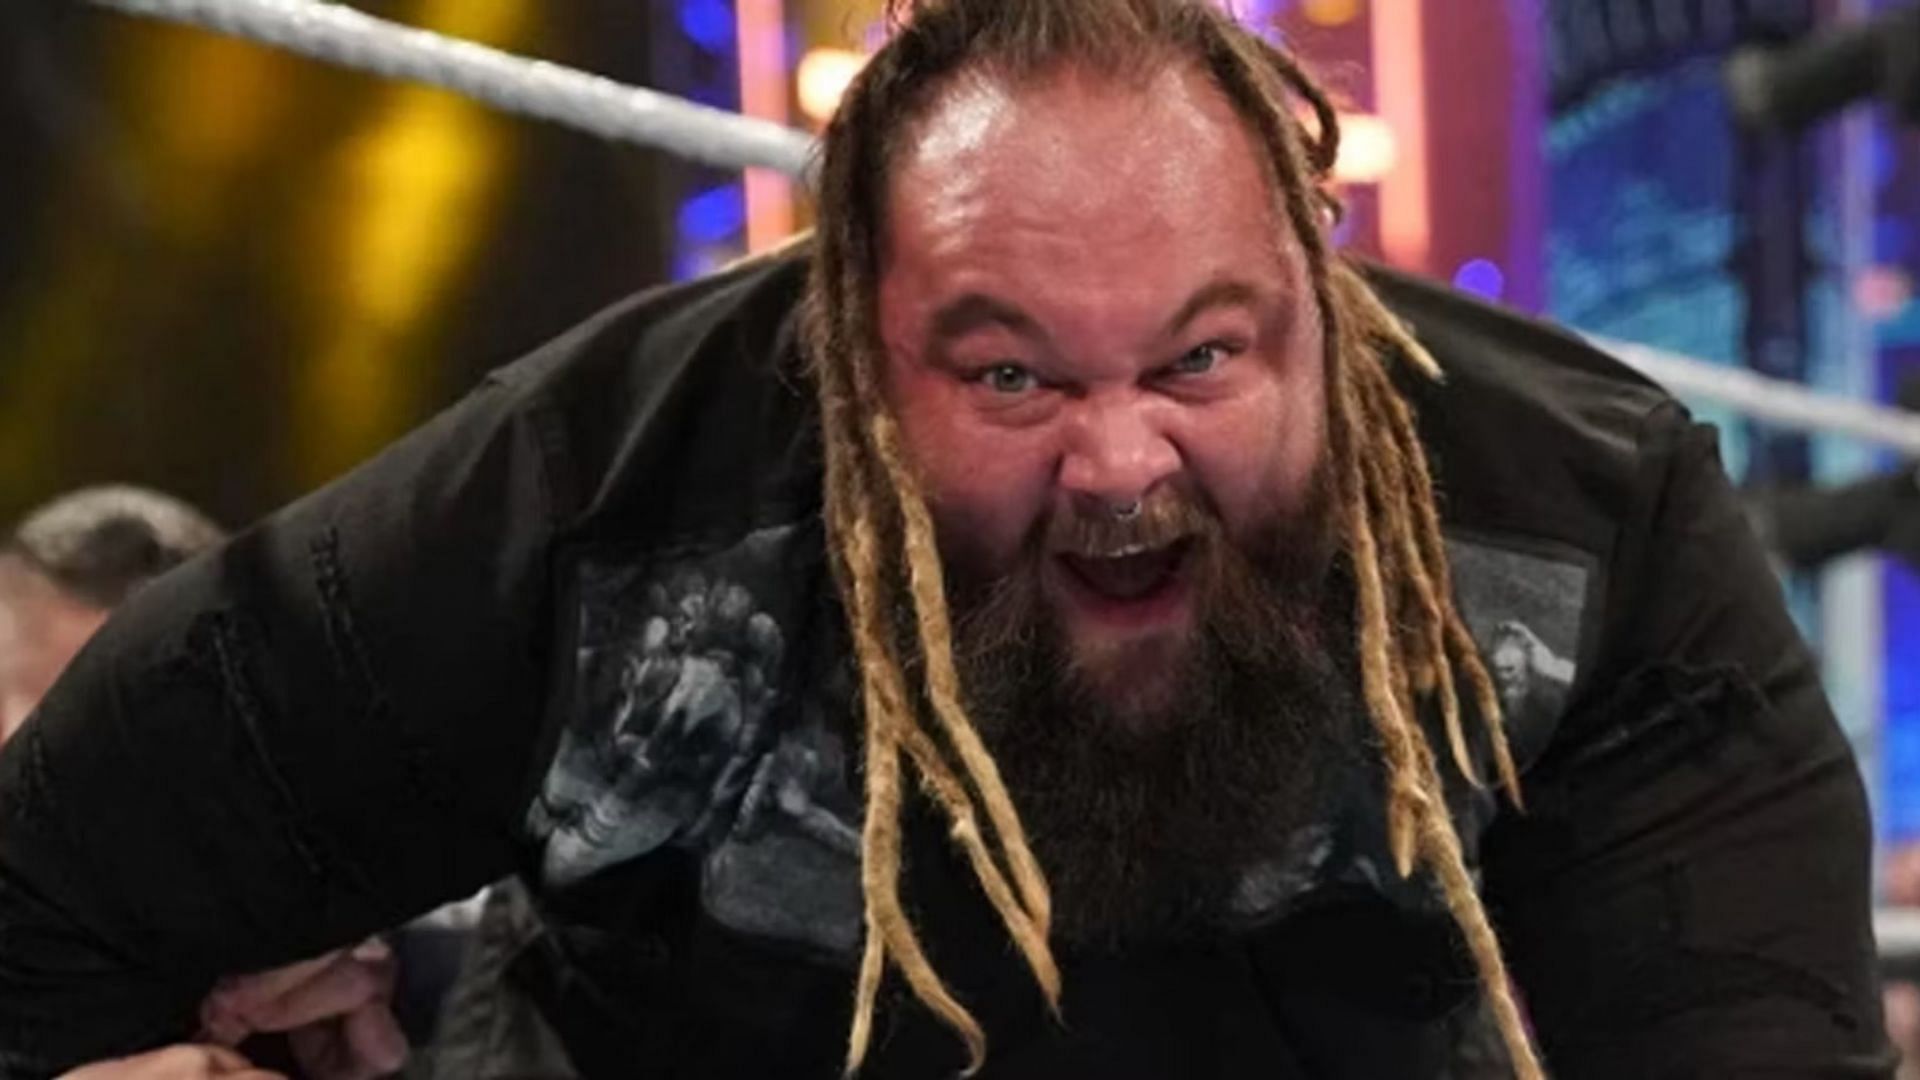 Bray Wyatt has been absent from WWE for several months